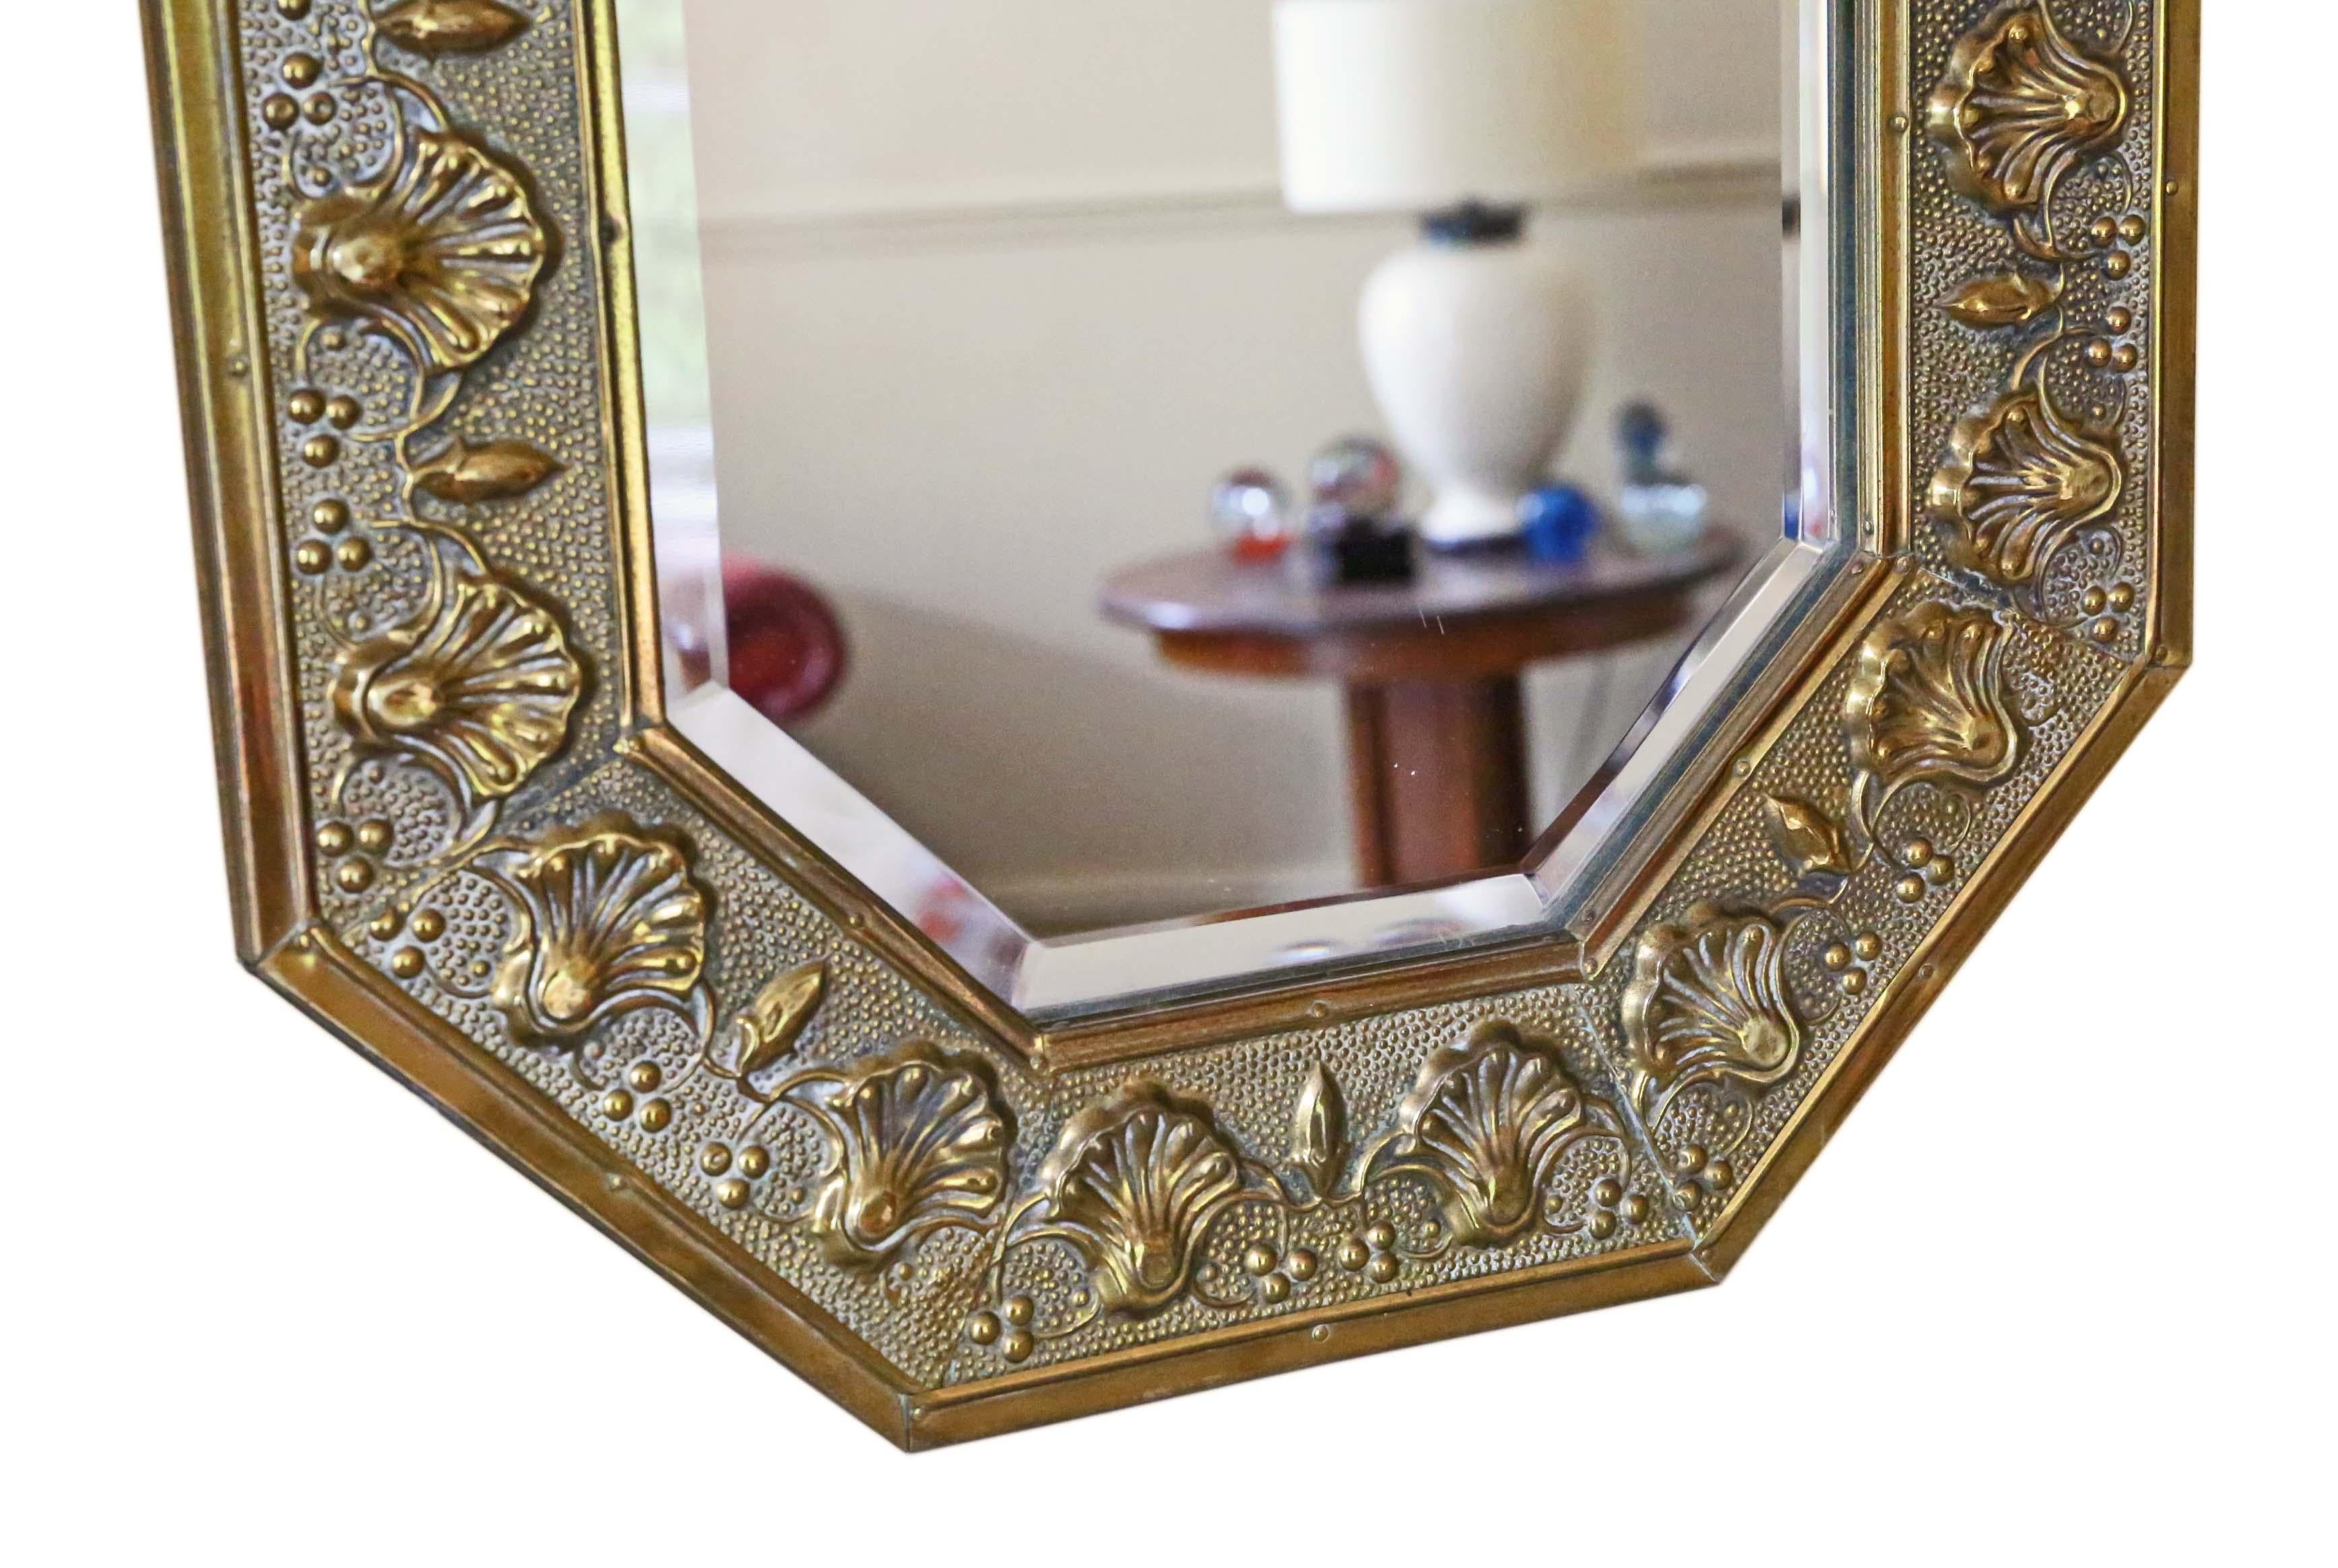 Antique quality Art Nouveau brass overmantle or wall mirror, circa 1910.
This is a lovely mirror in a great frame in very good condition… looks great.
An impressive and rare find, that would look amazing in the right location.
The bevel edge